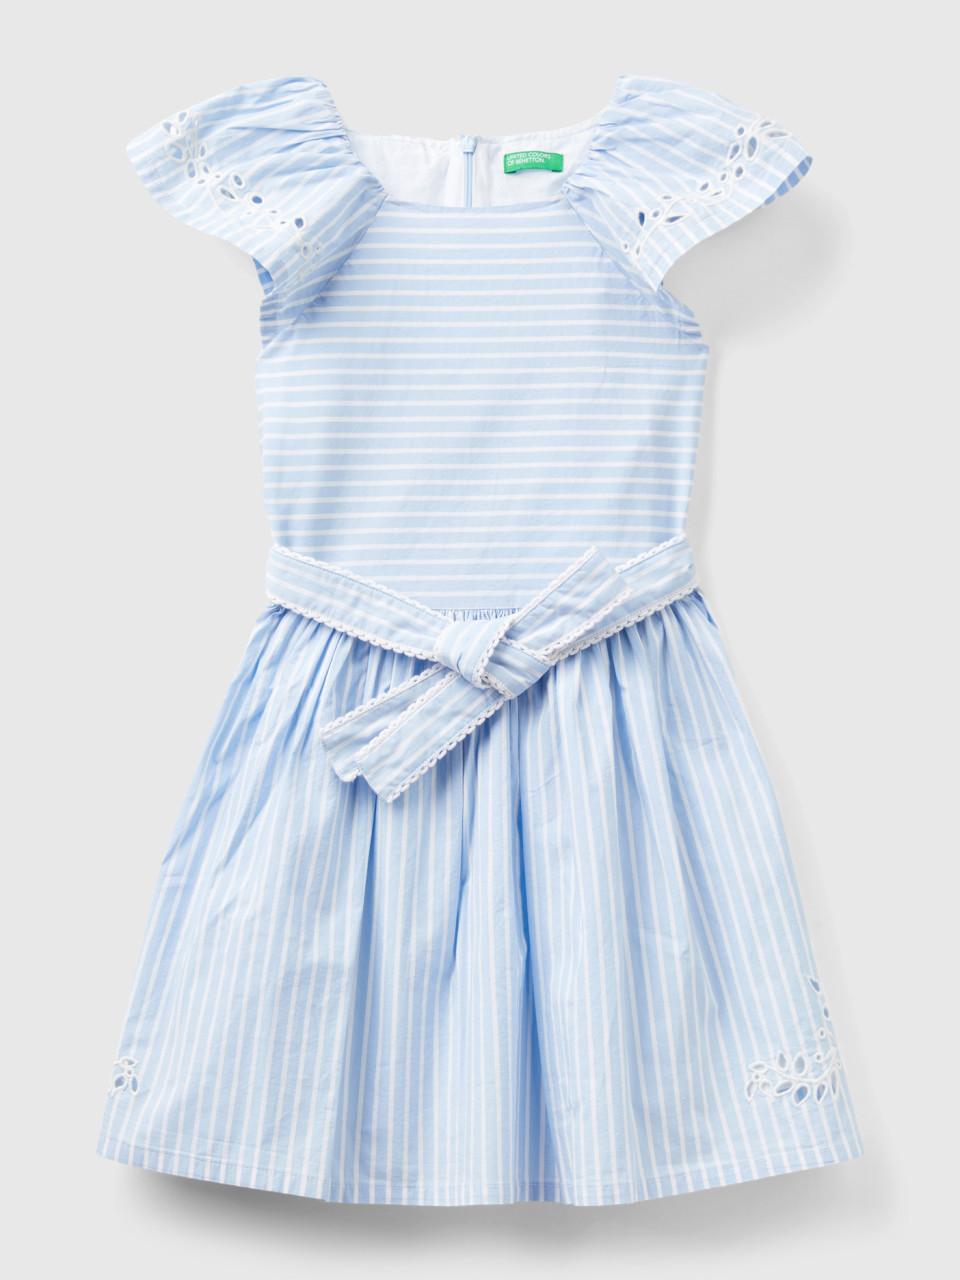 Benetton, Striped Dress With Embroidery, Sky Blue, Kids